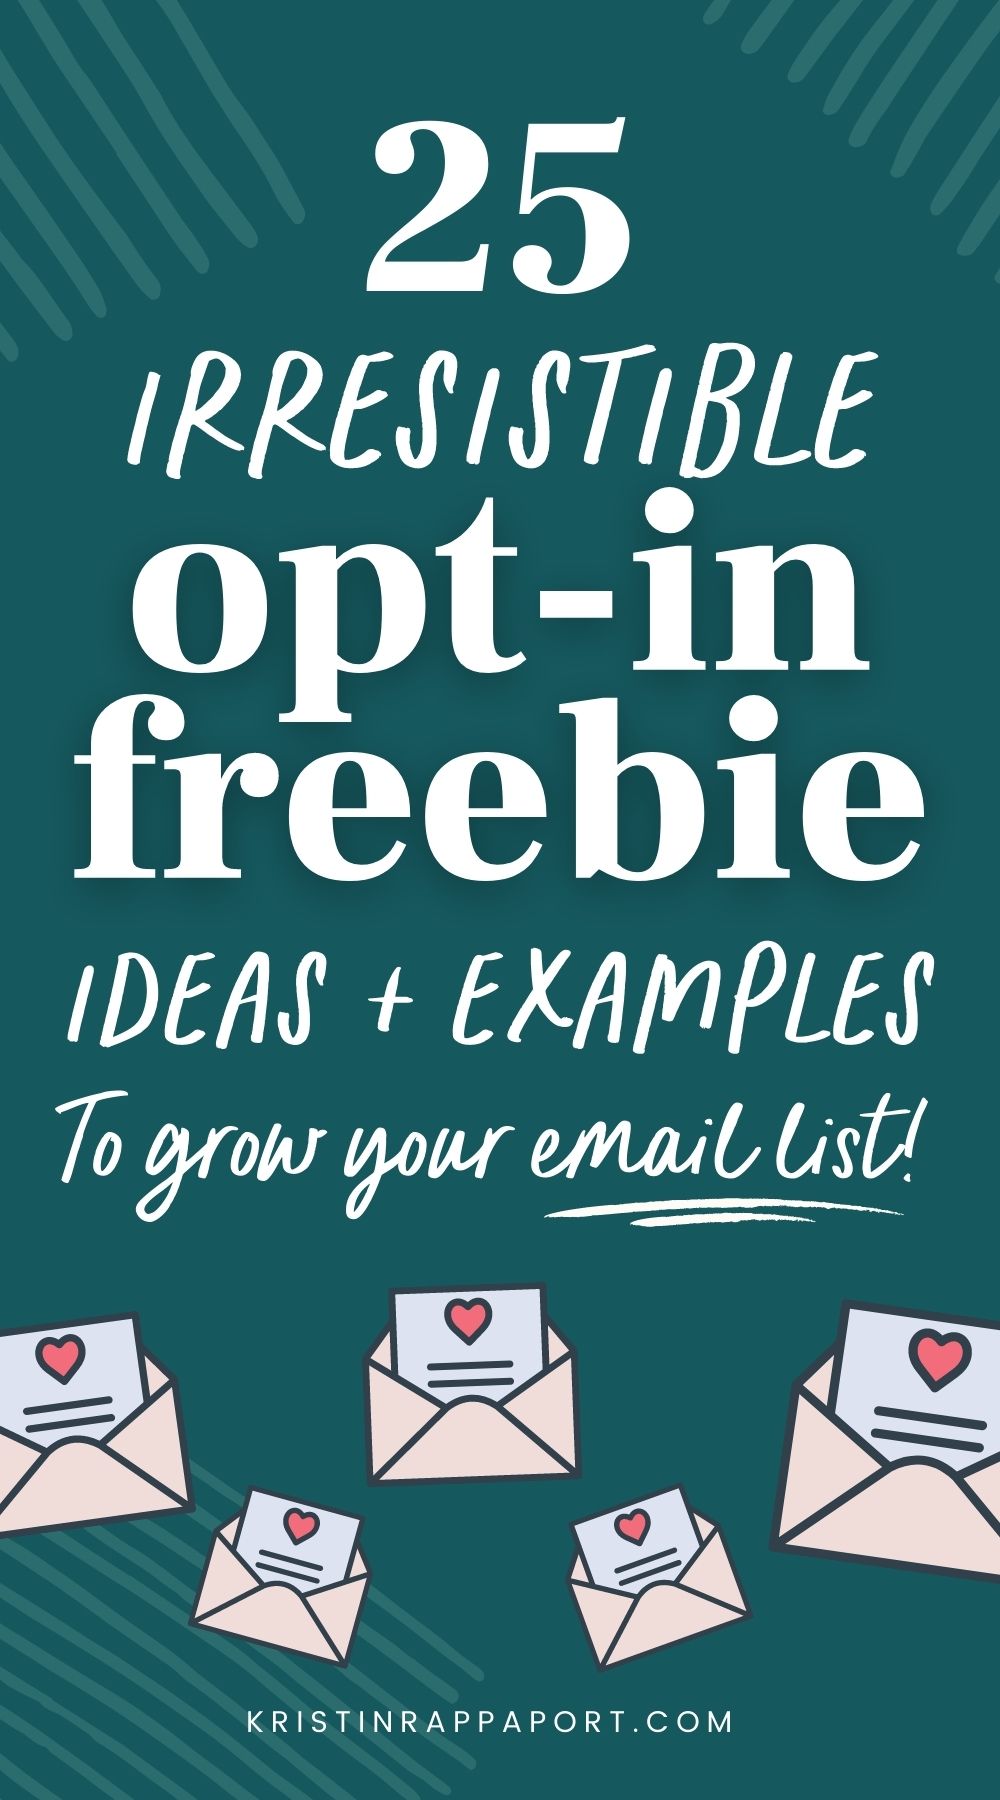 Find the Perfect Creative Mockups Freebies